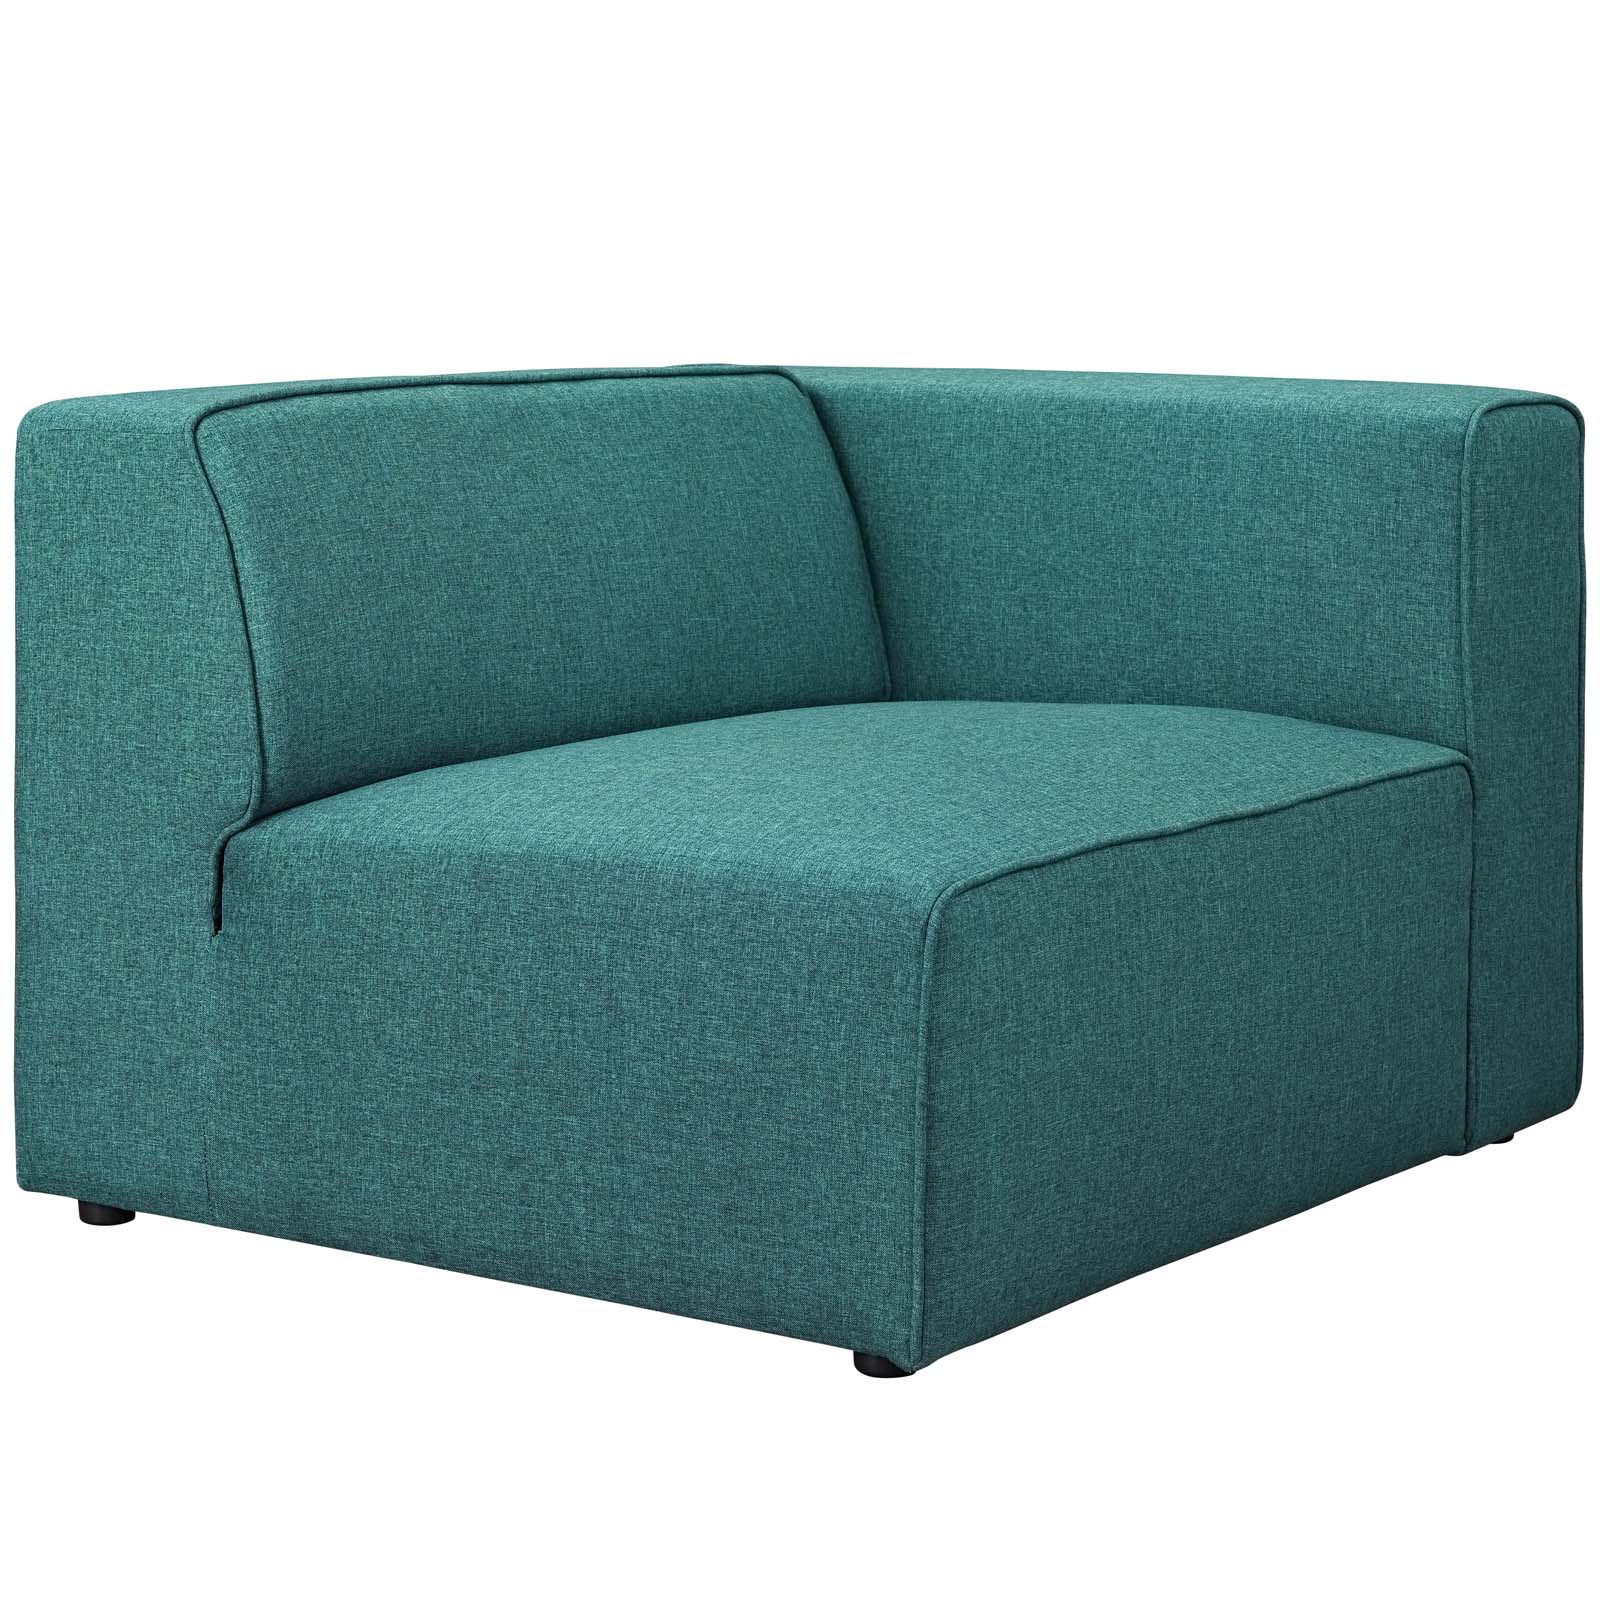 Modway Sectional Sofas - Mingle 5 Piece Upholstered 115"W Fabric Sectional Sofa Set Teal